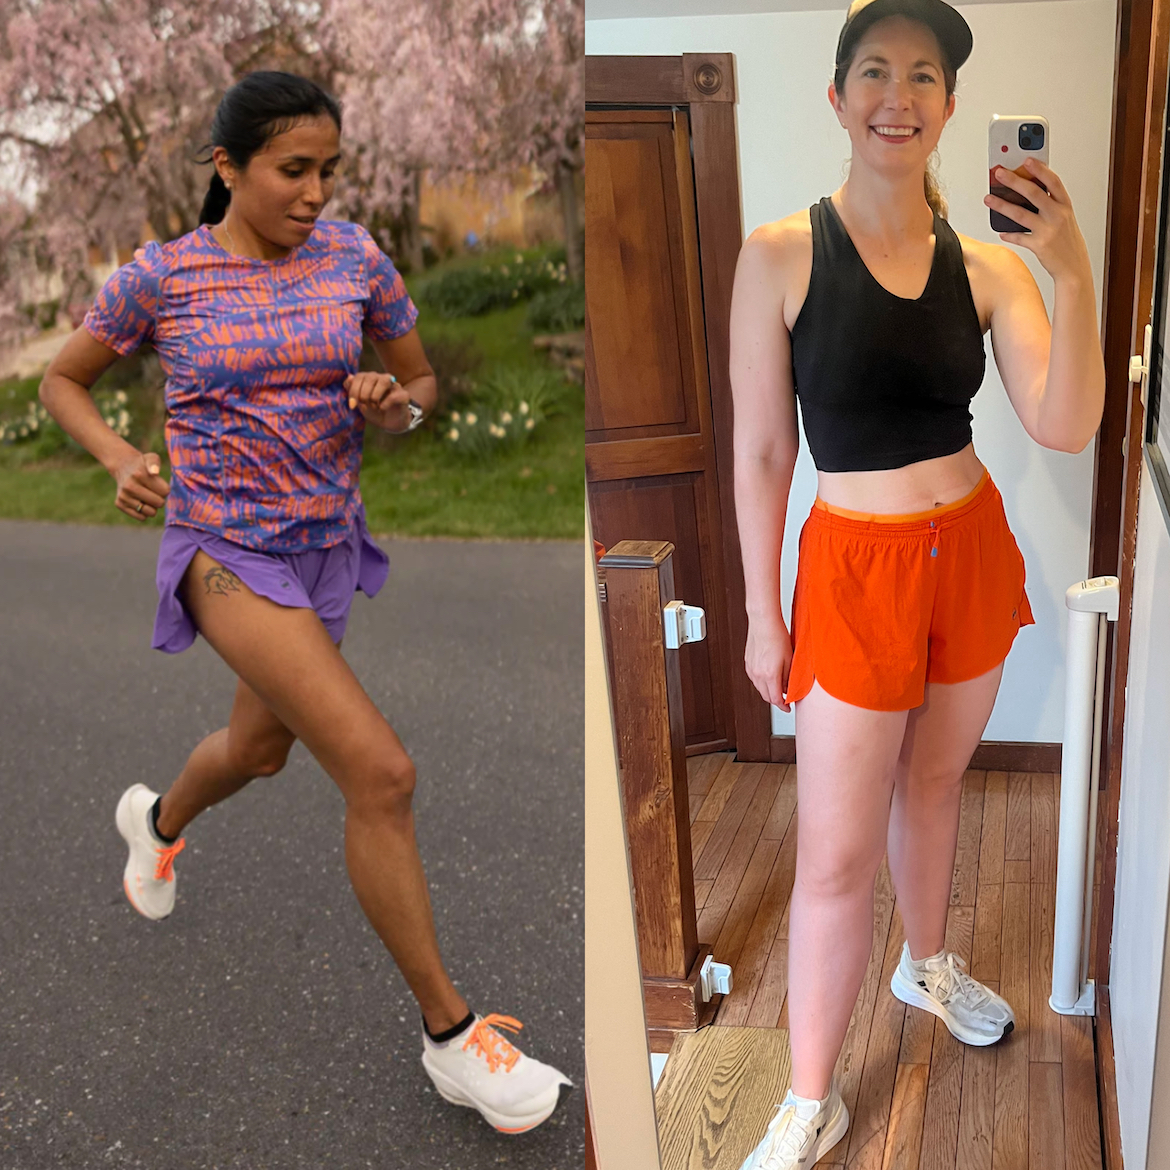 The 4 best running shorts for women in 2023